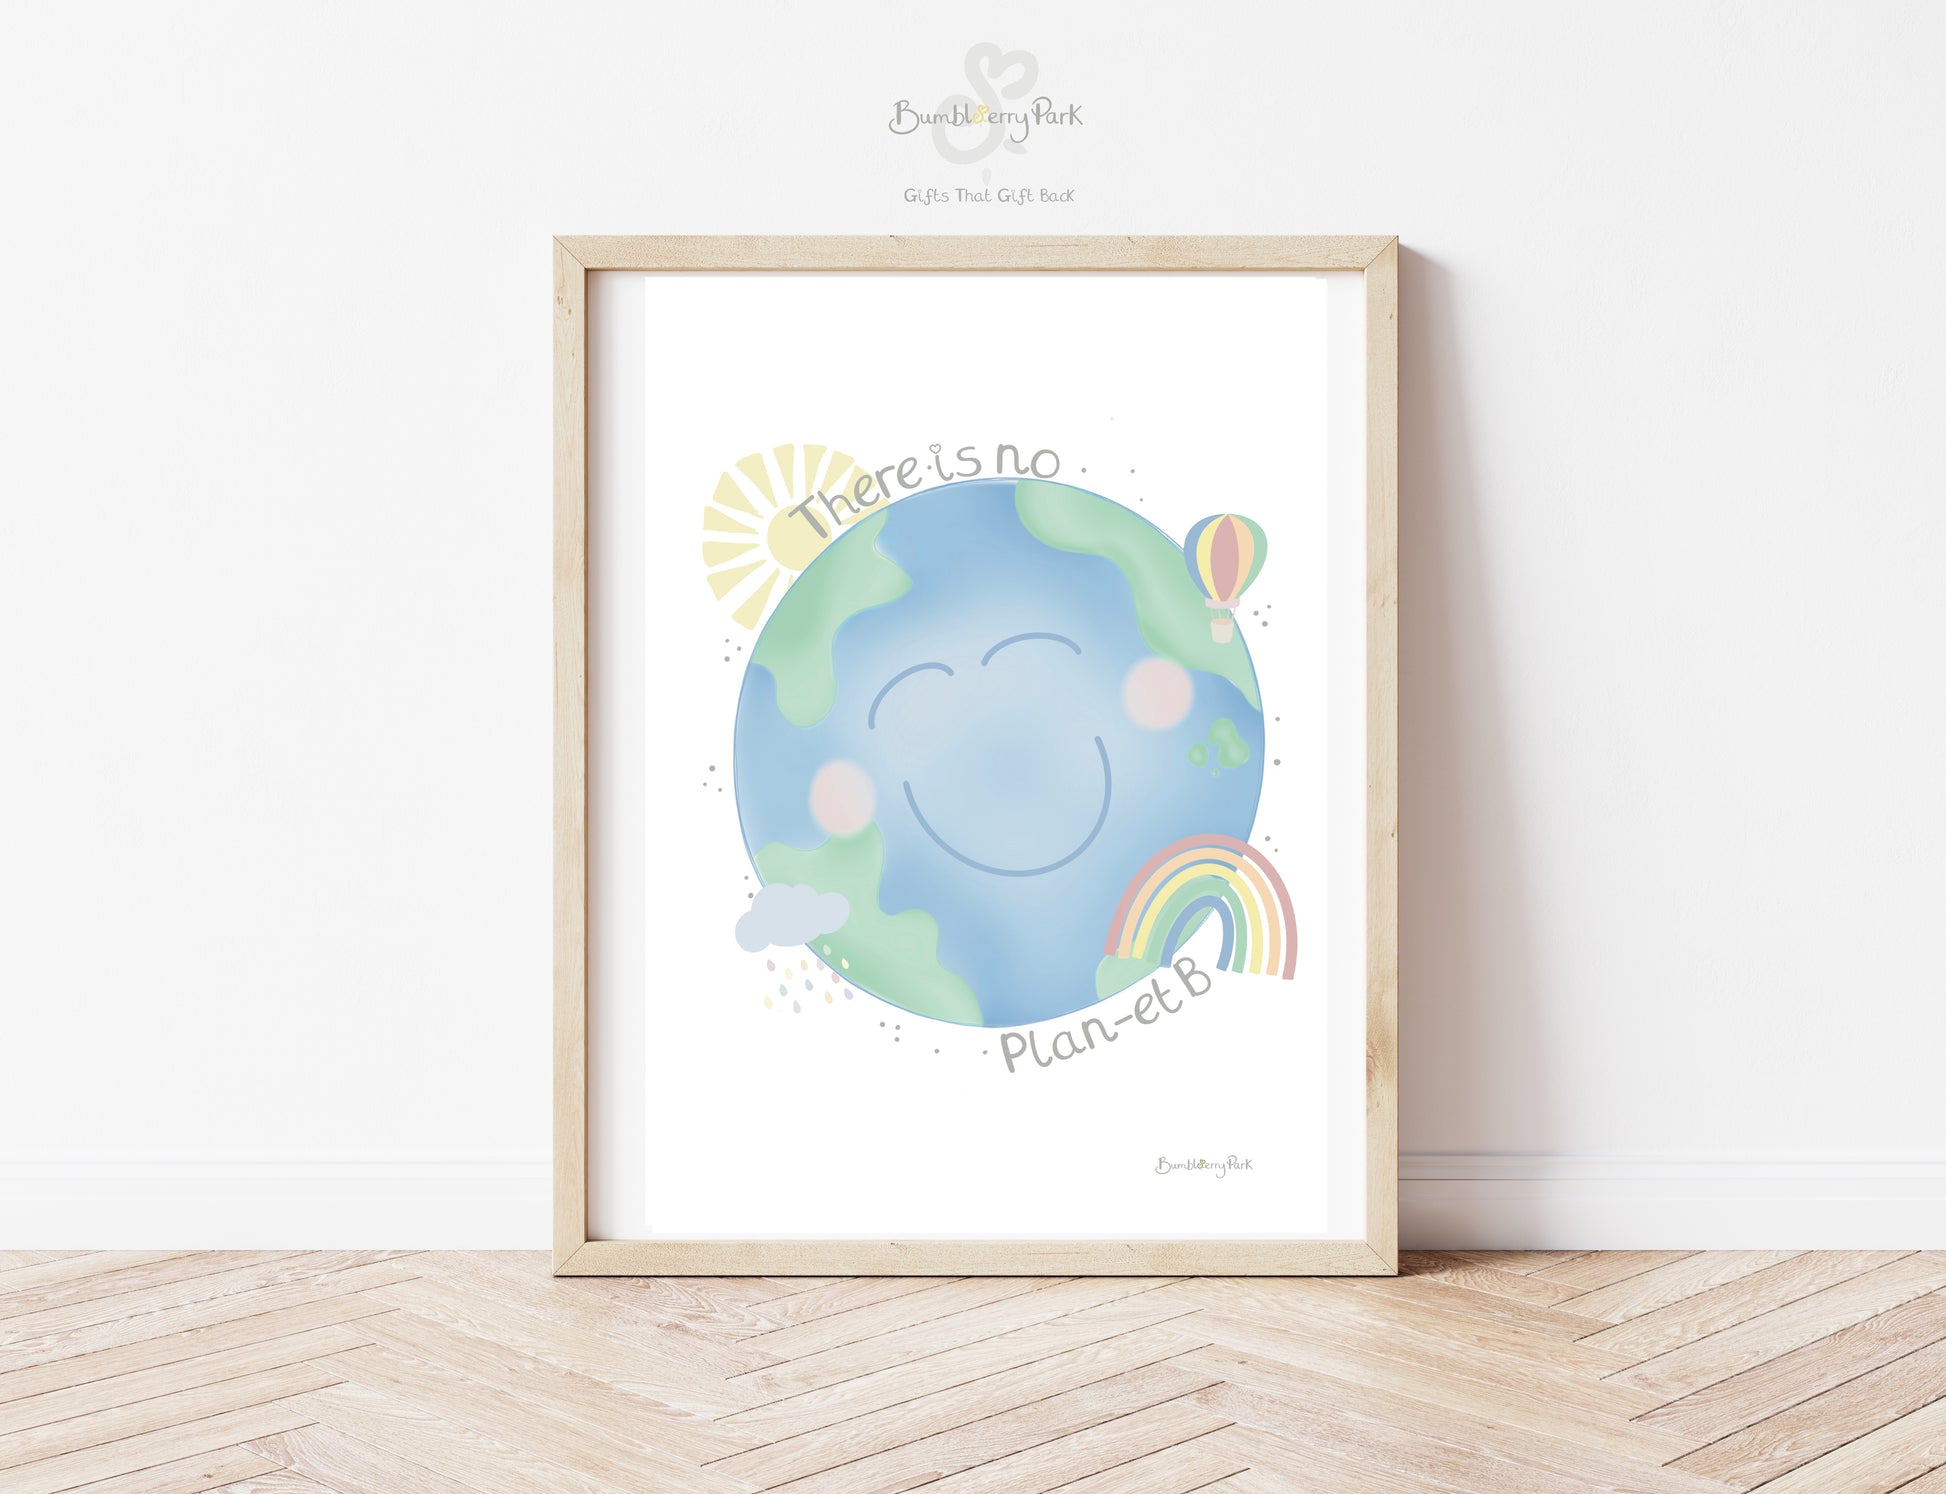 framed nursery print of earth illustration and quote "there is no planet b"